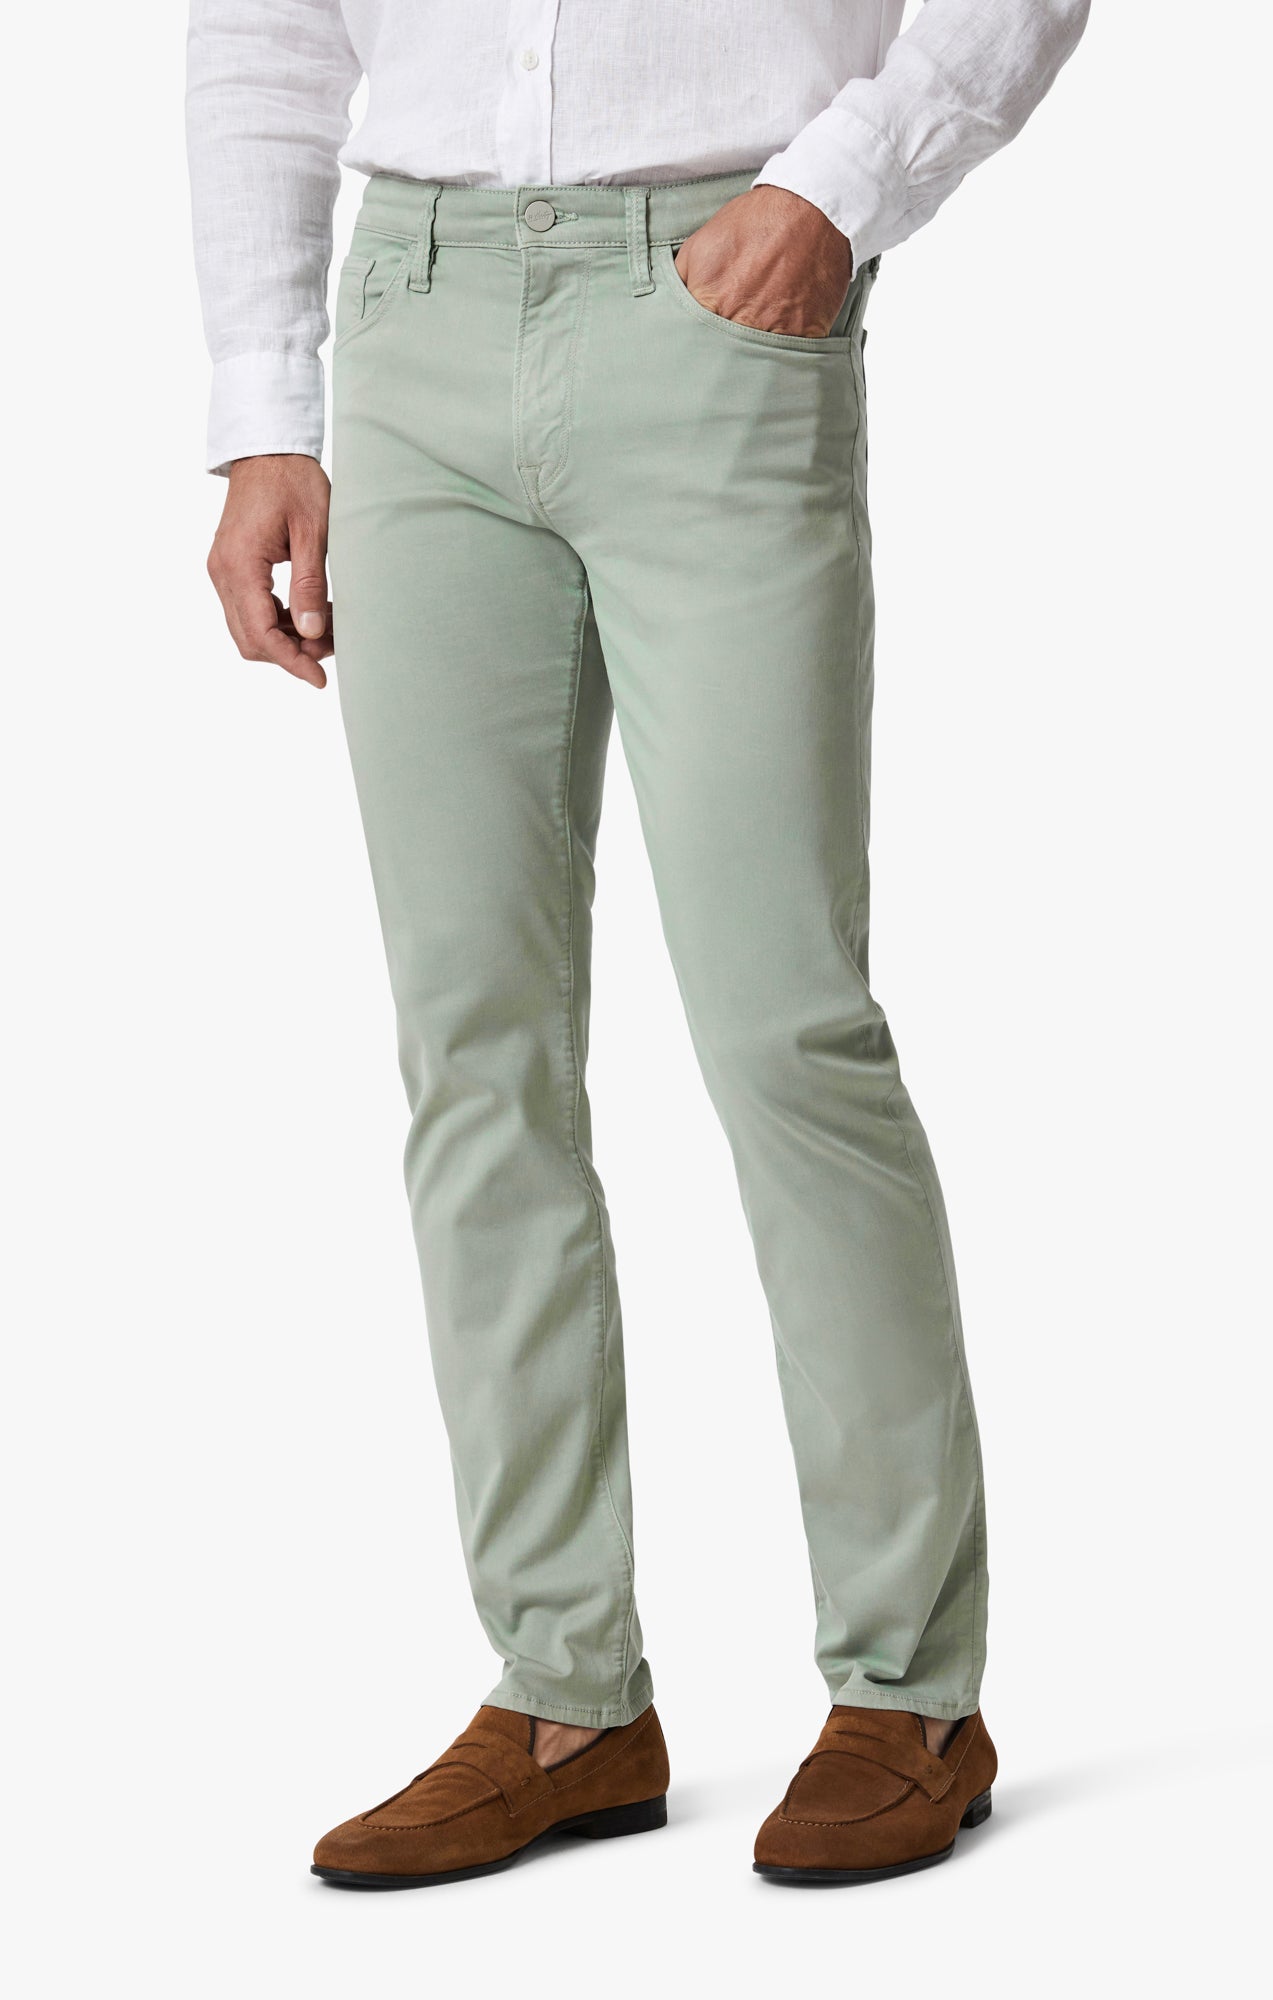 Courage Iceberg Twill Pant in Green